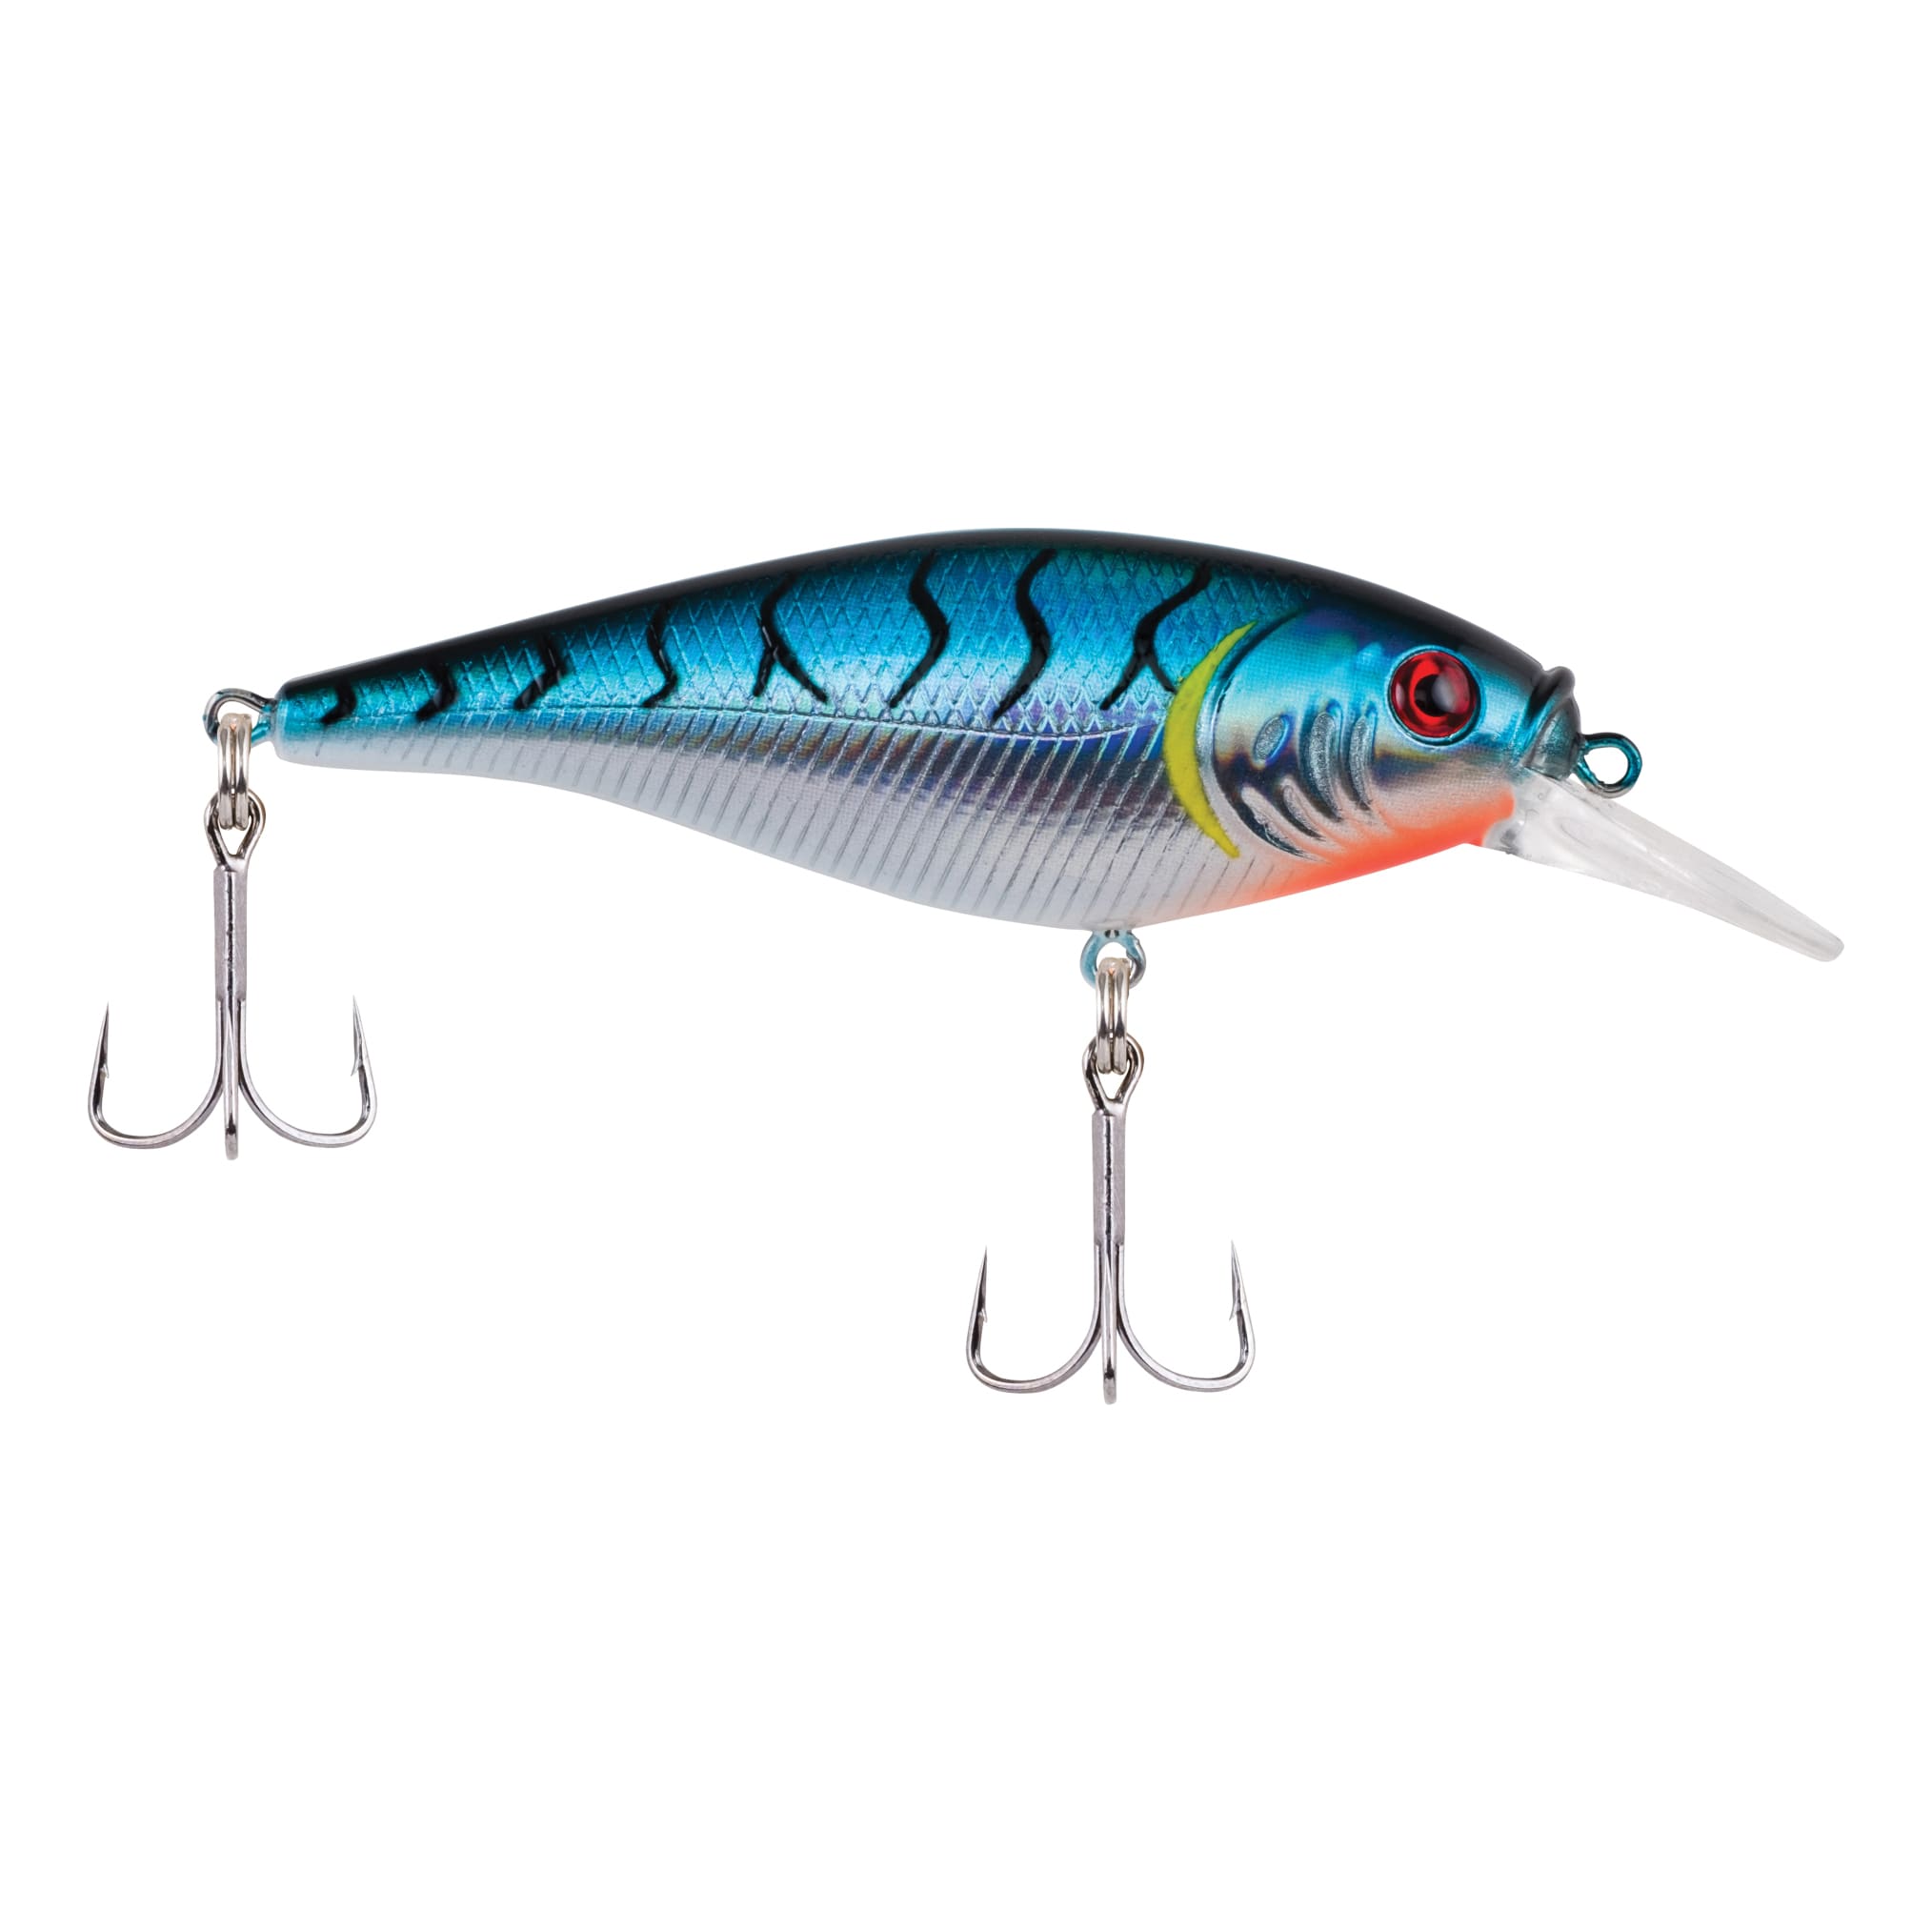 Introducing Berkley Scent to Hard Baits with the Berkley Scented Flicker  Shad - Fishing Tackle Retailer - The Business Magazine of the Sportfishing  Industry